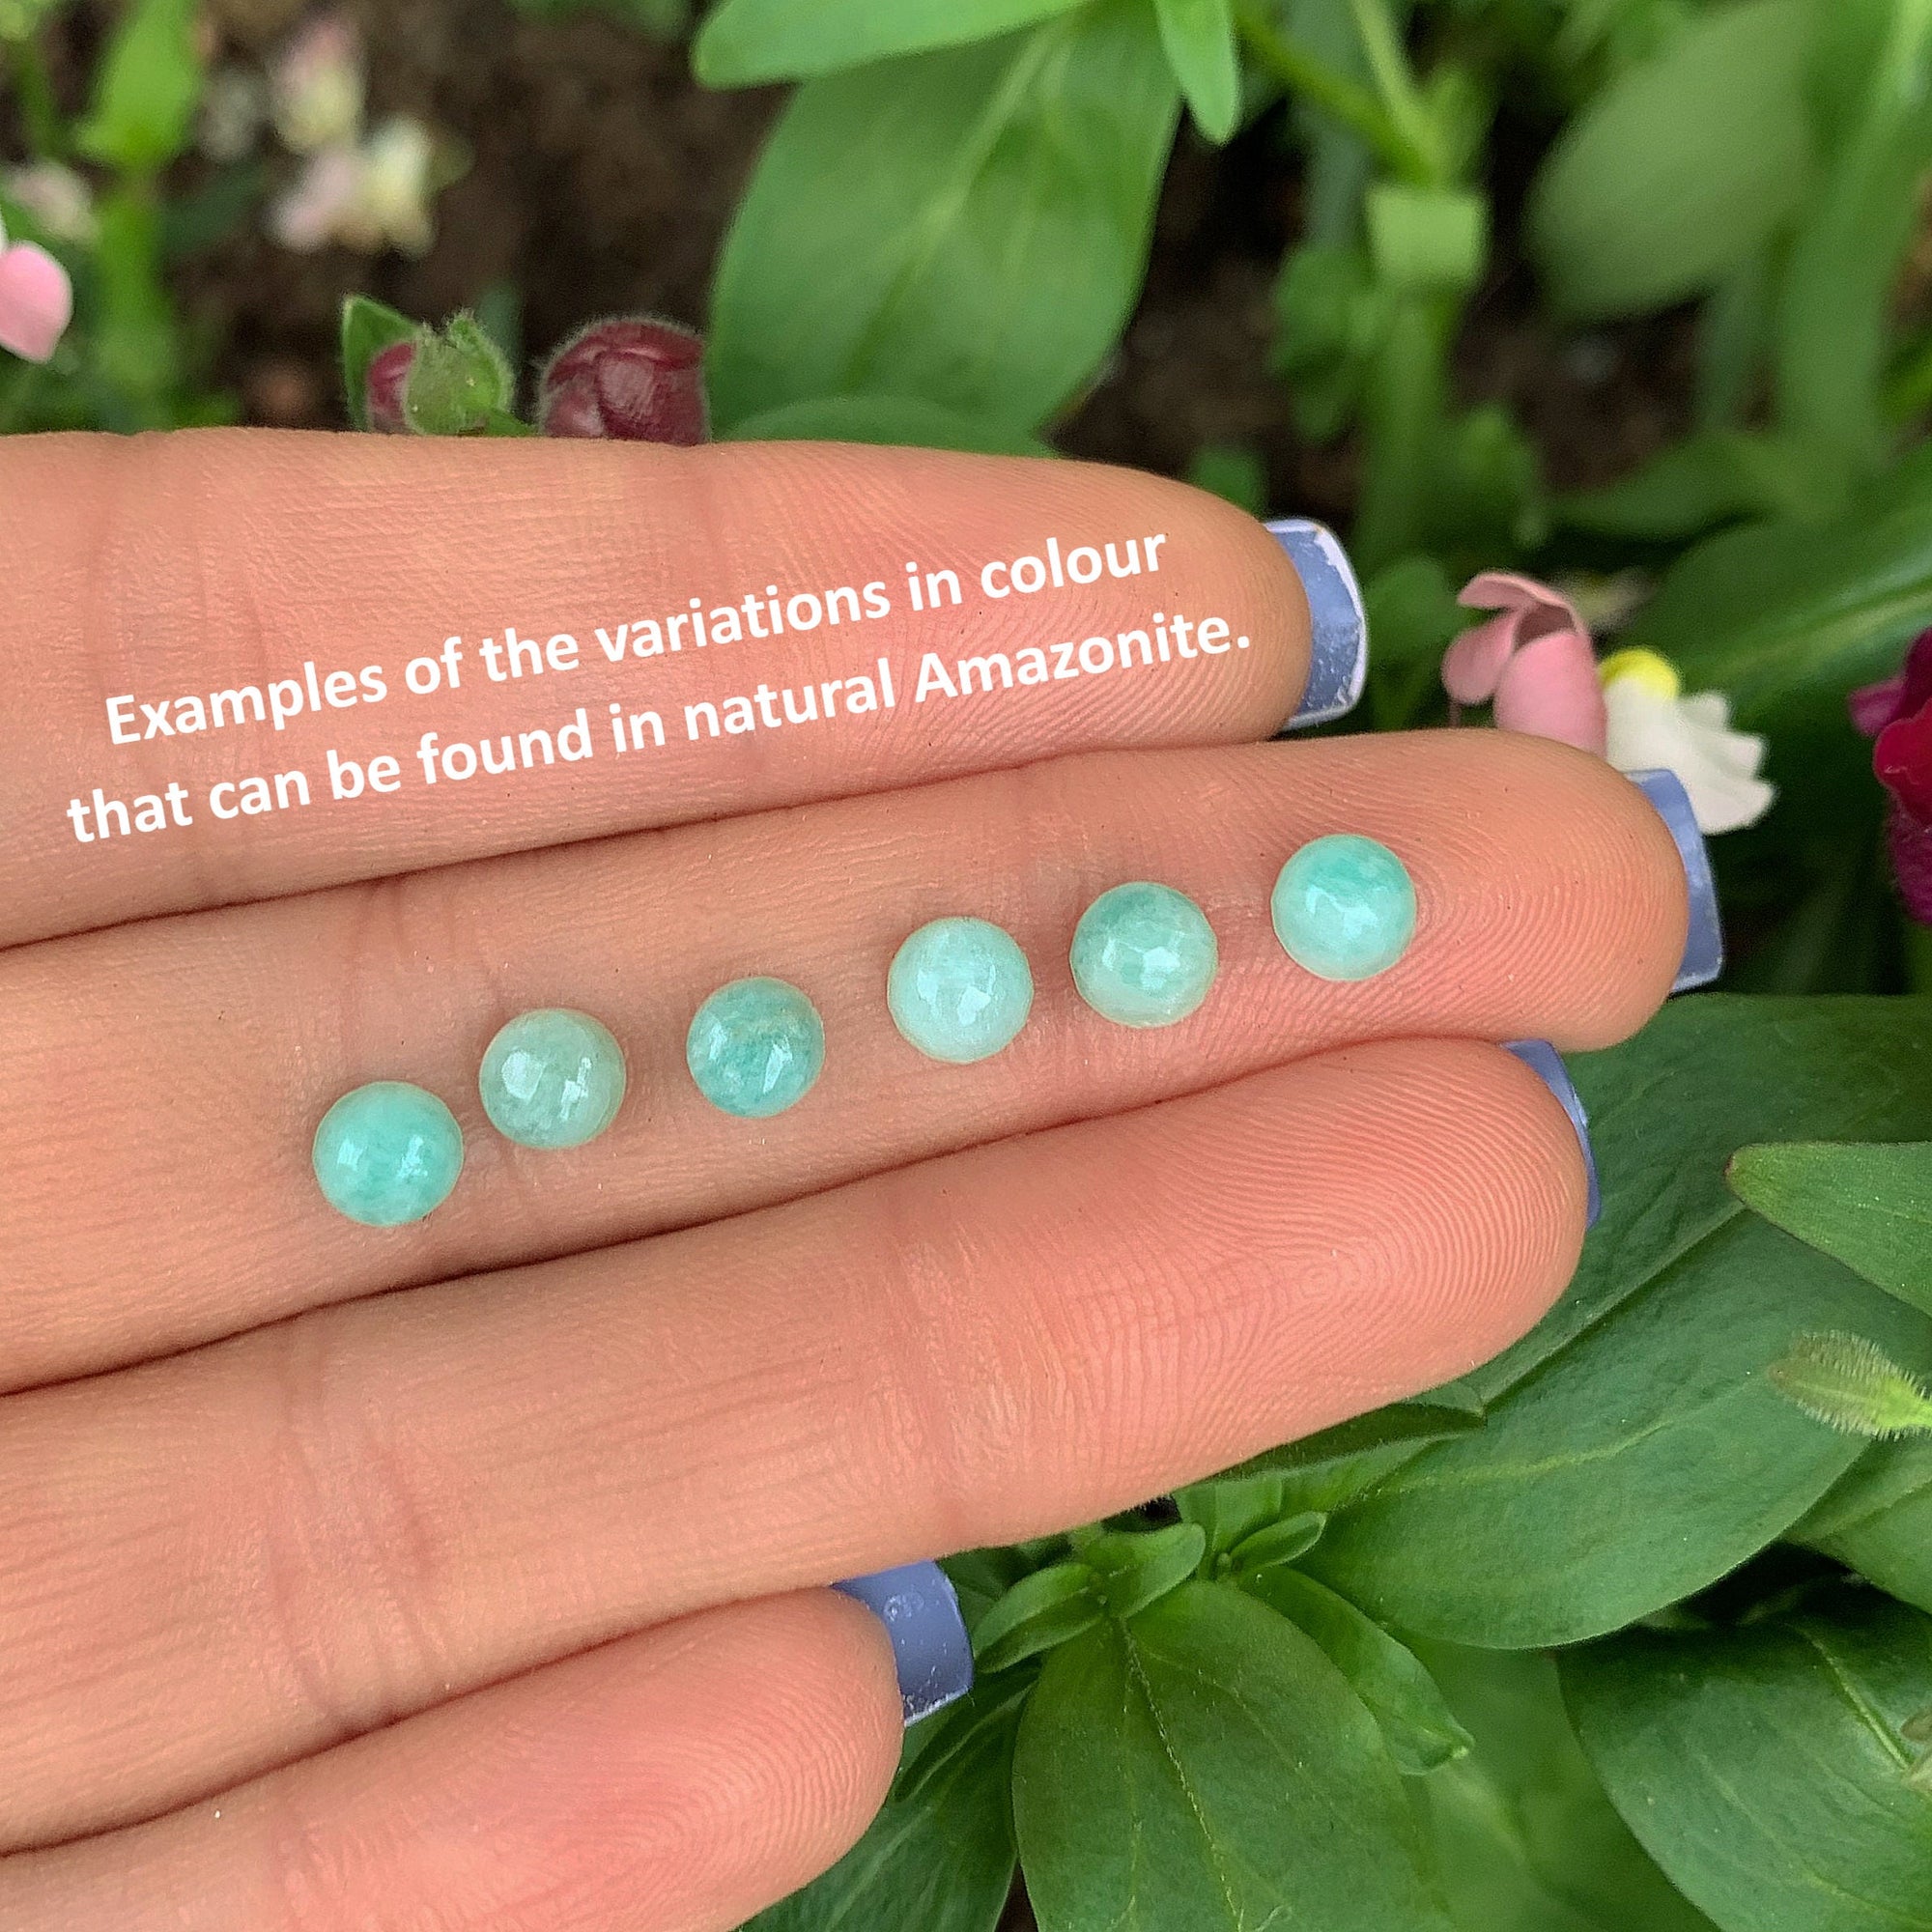 Amazonite Twist Ring - Made to Order 